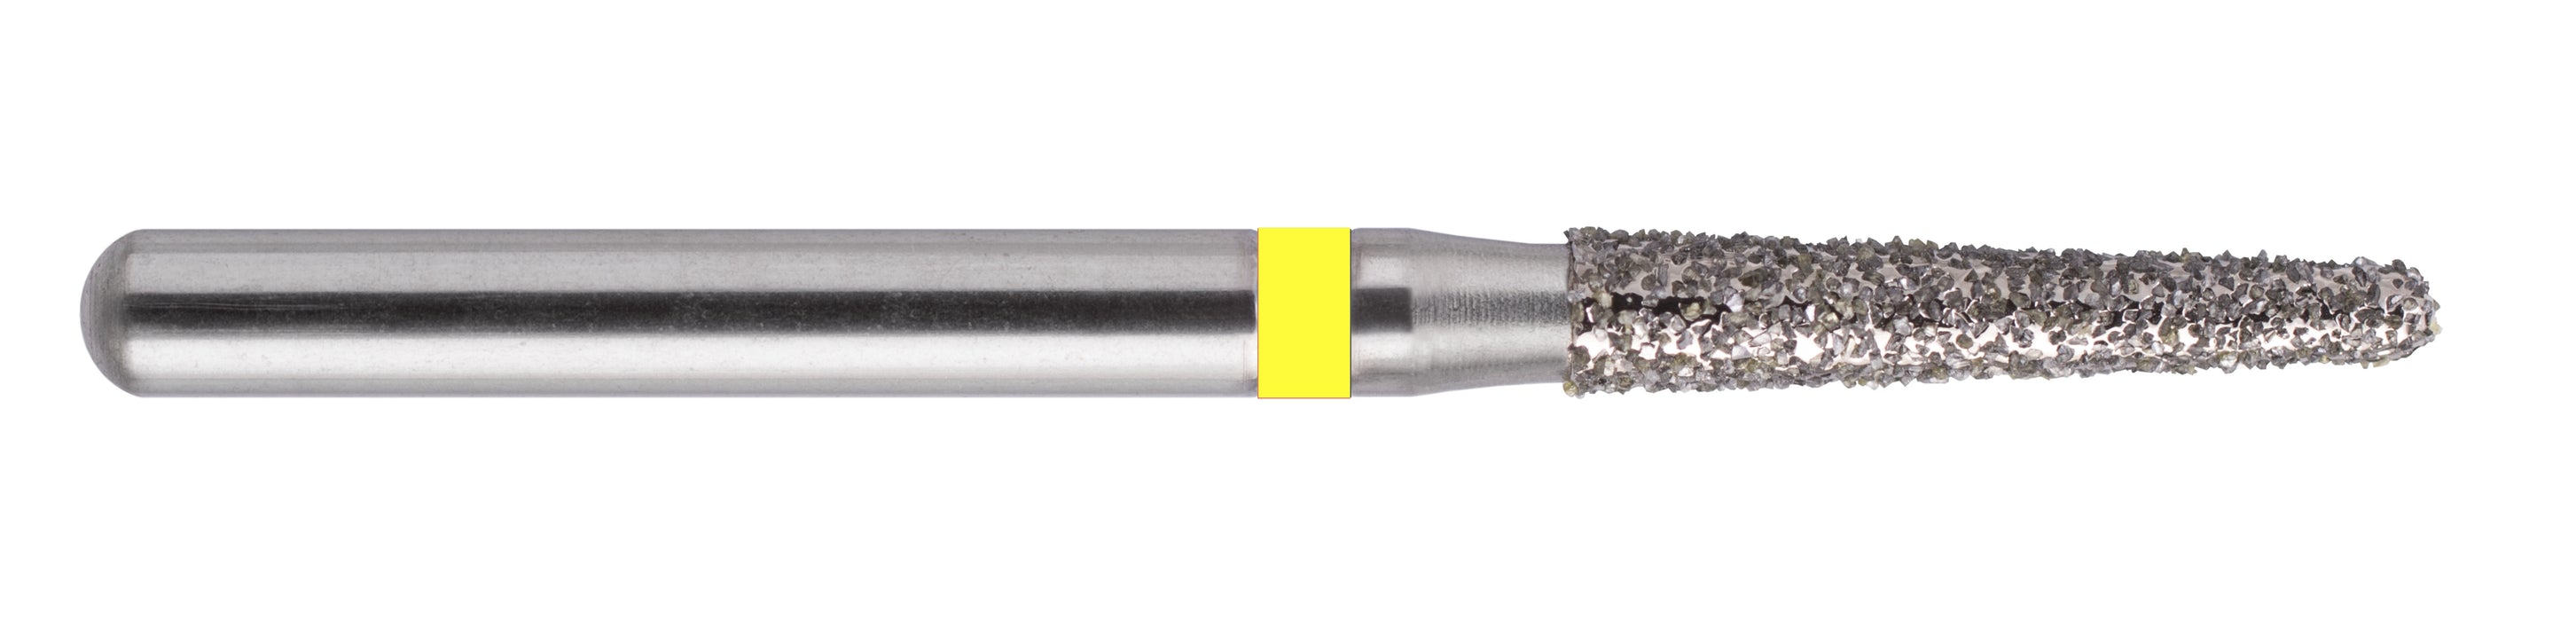 856S - Cone with rounded tip